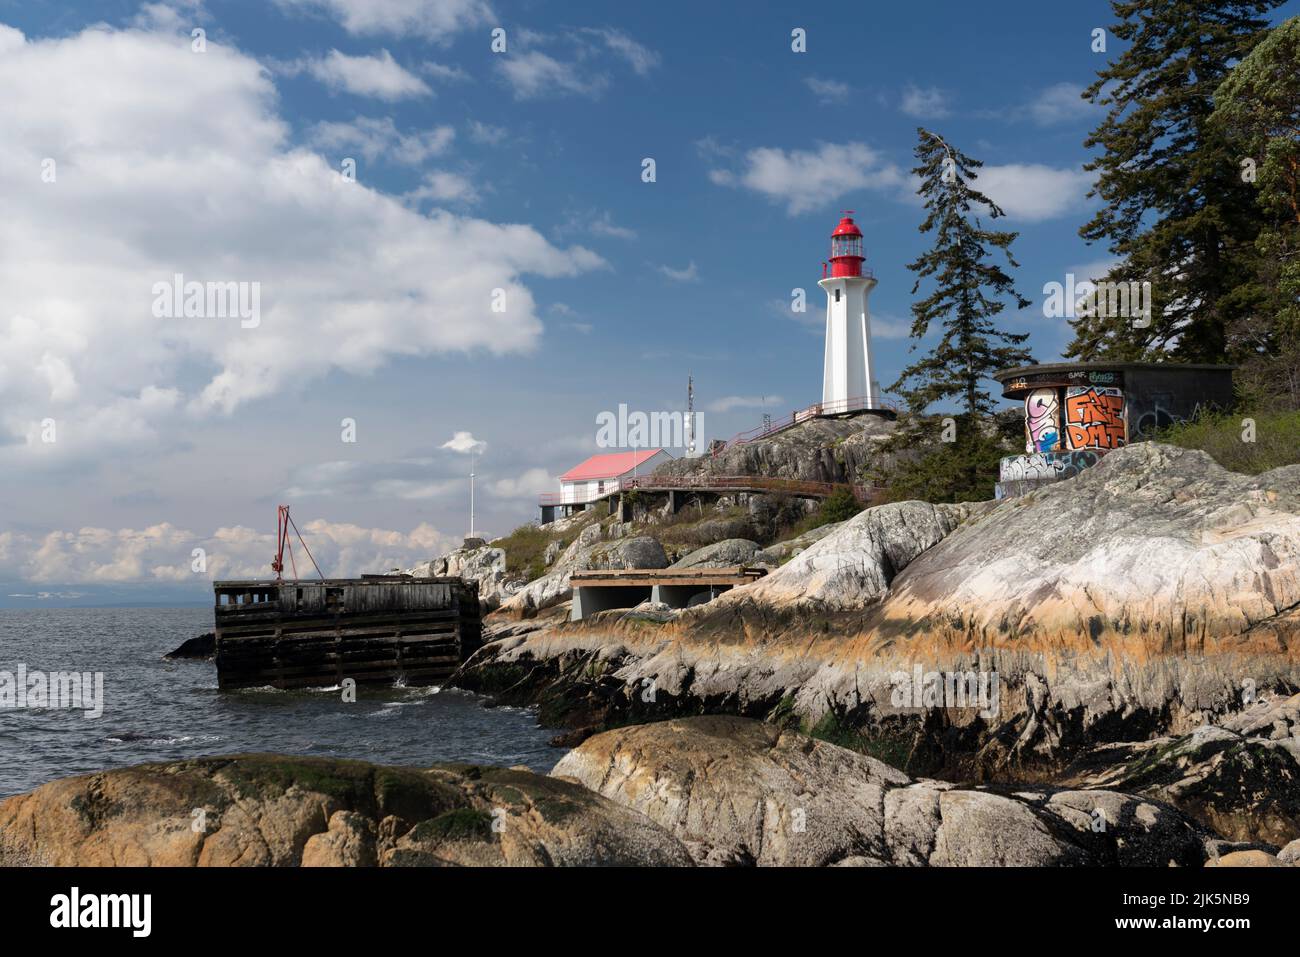 The lighthouse at Lighthouse Park in West Vancouver, British Columbia, Canada. Stock Photo